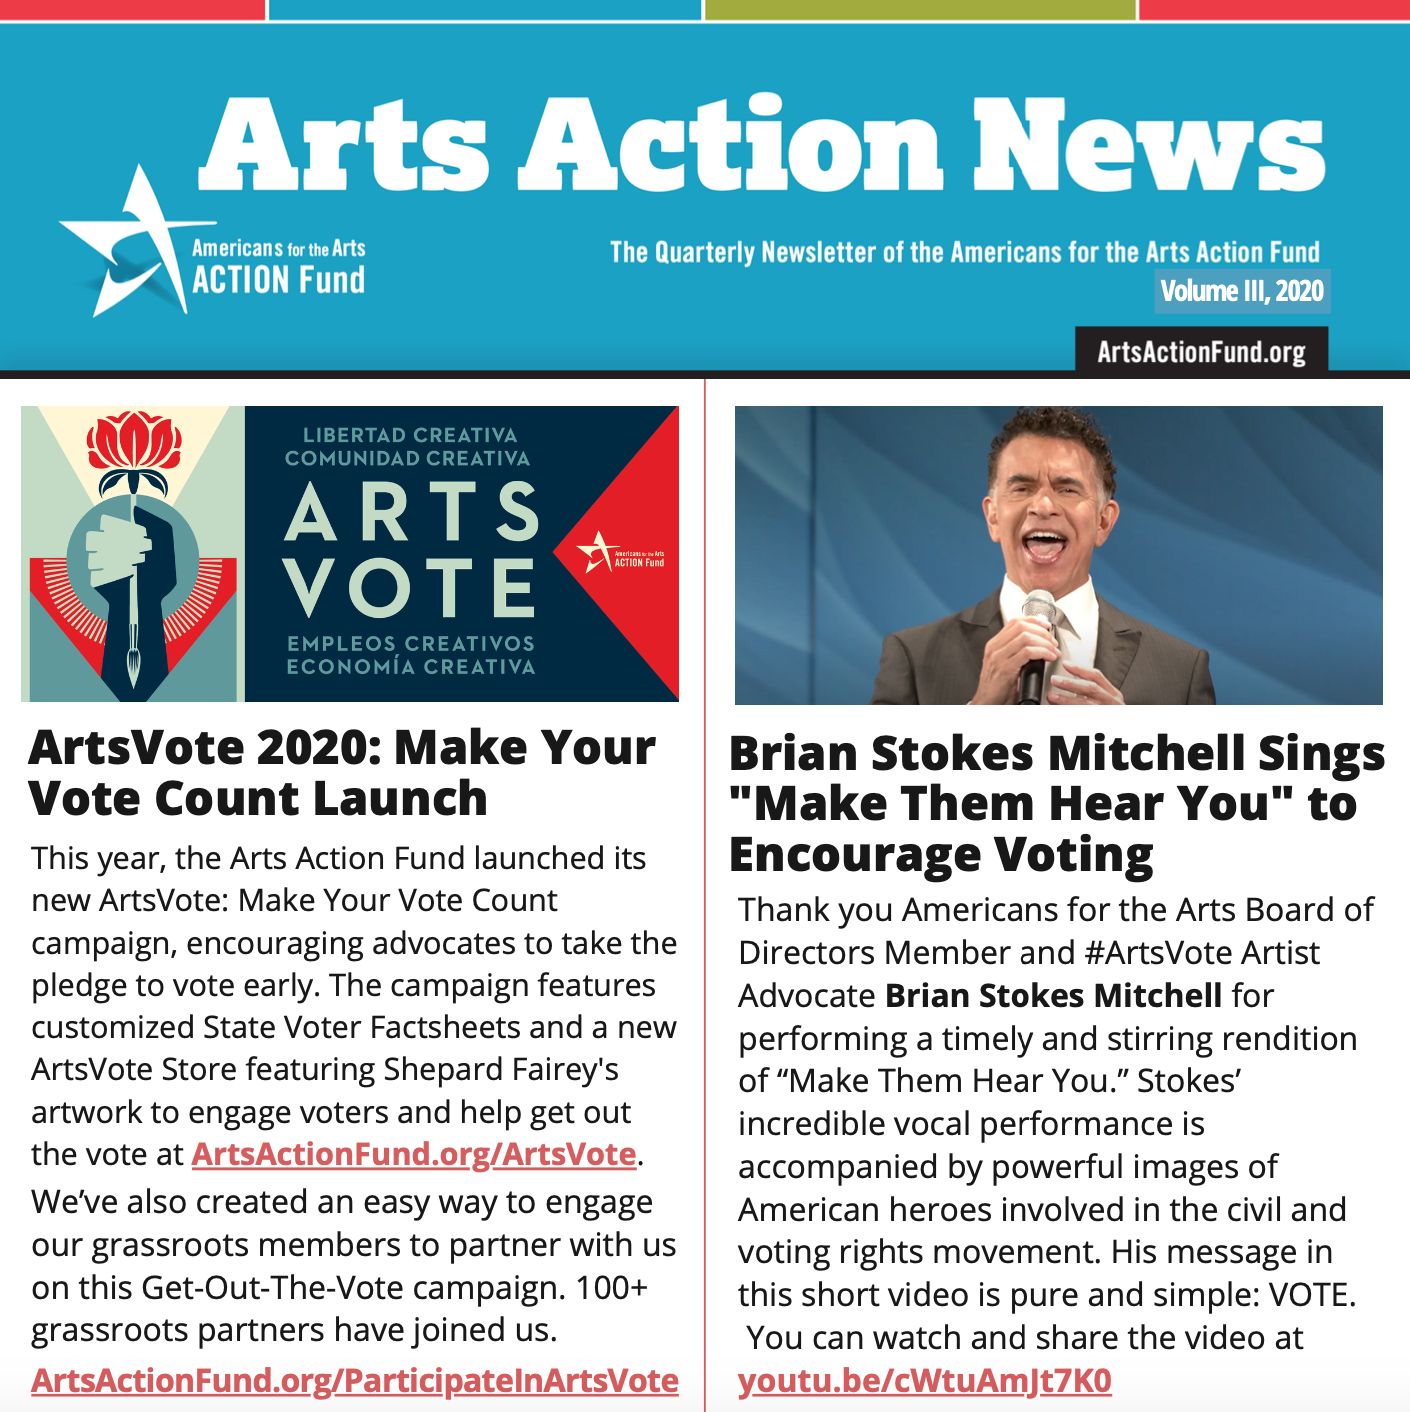 Click here to read Arts Action News Volume III, 2020